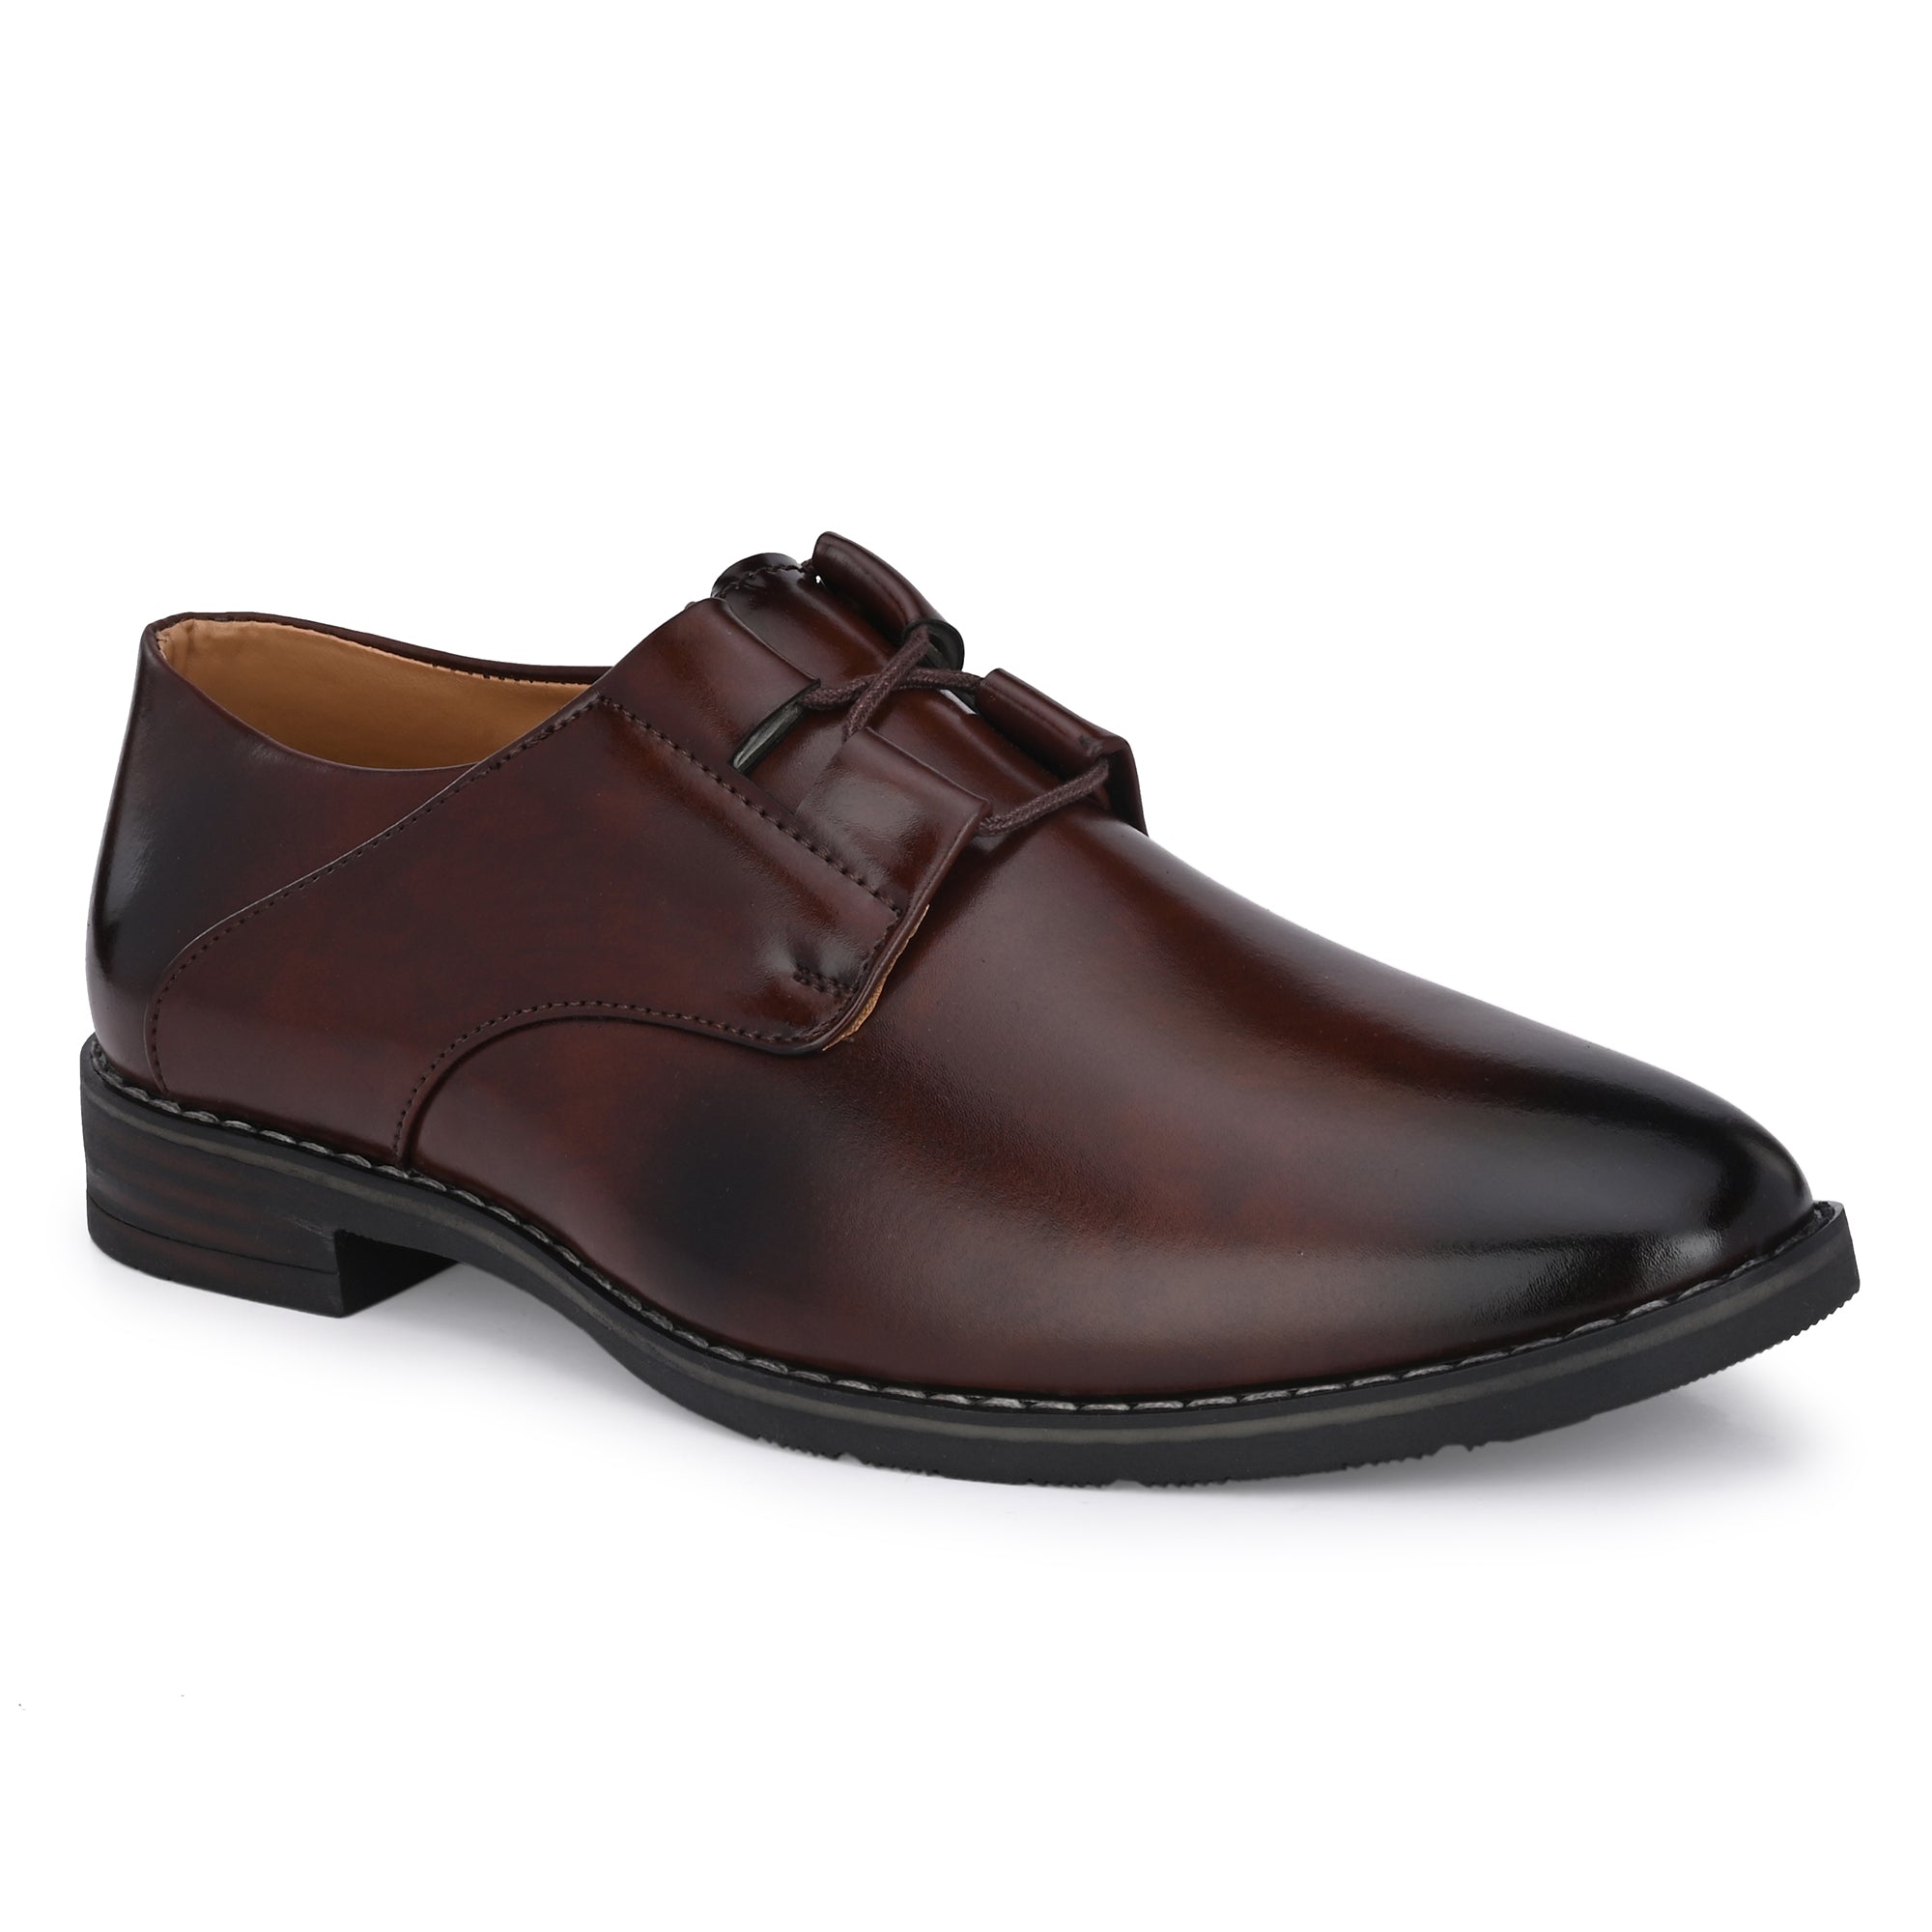 formal-lace-up-attitudist-shoes-for-men-with-design-4001brown